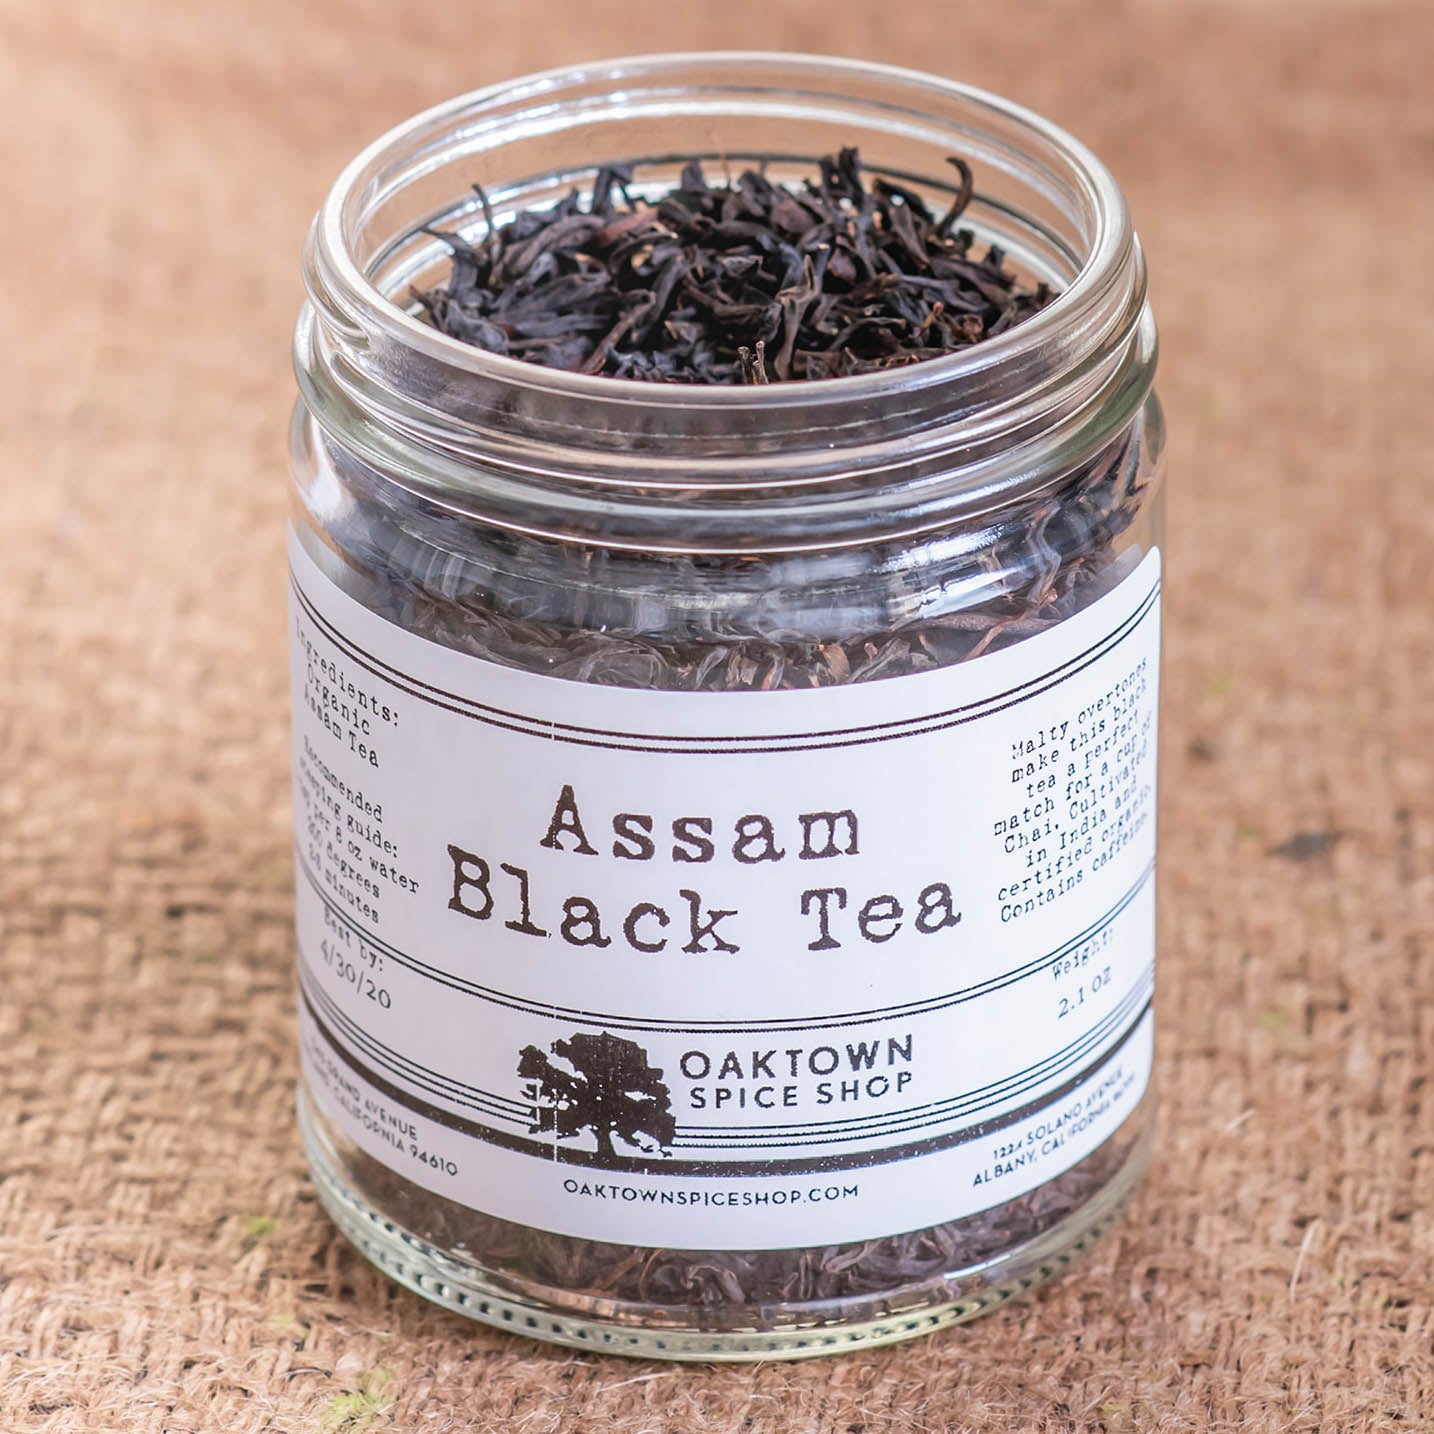 rganic Assam Tea ultivated in India and Certified Organic from Oaktown Spice Shop